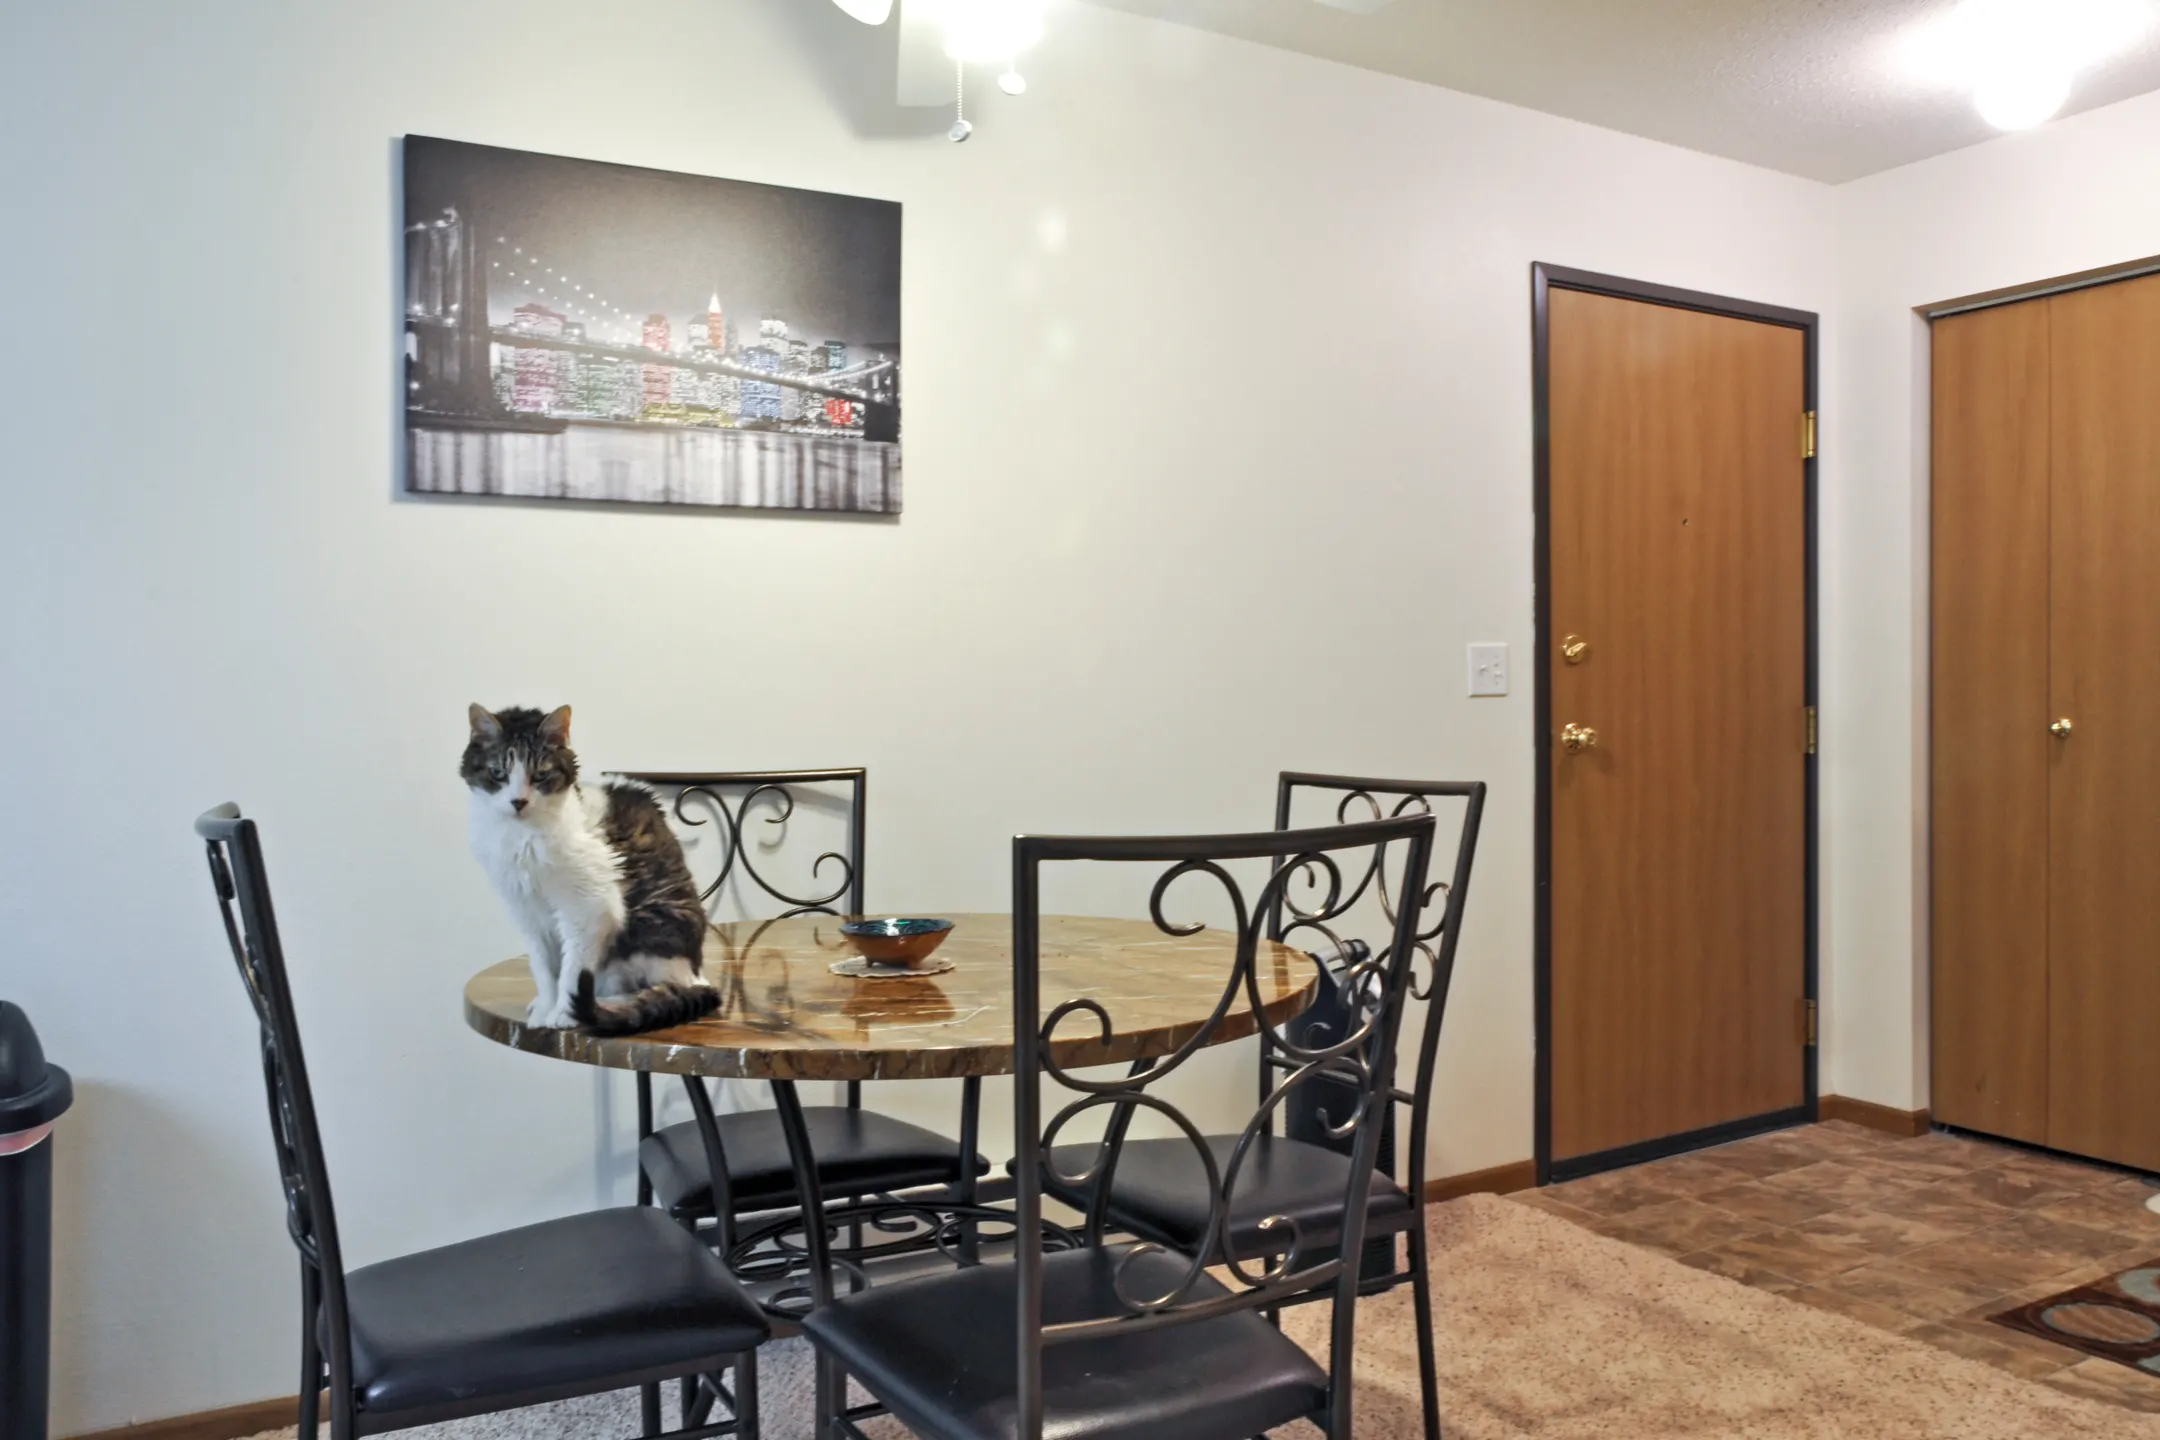 Dining Room - Orchid Place Apartments - Fargo, ND